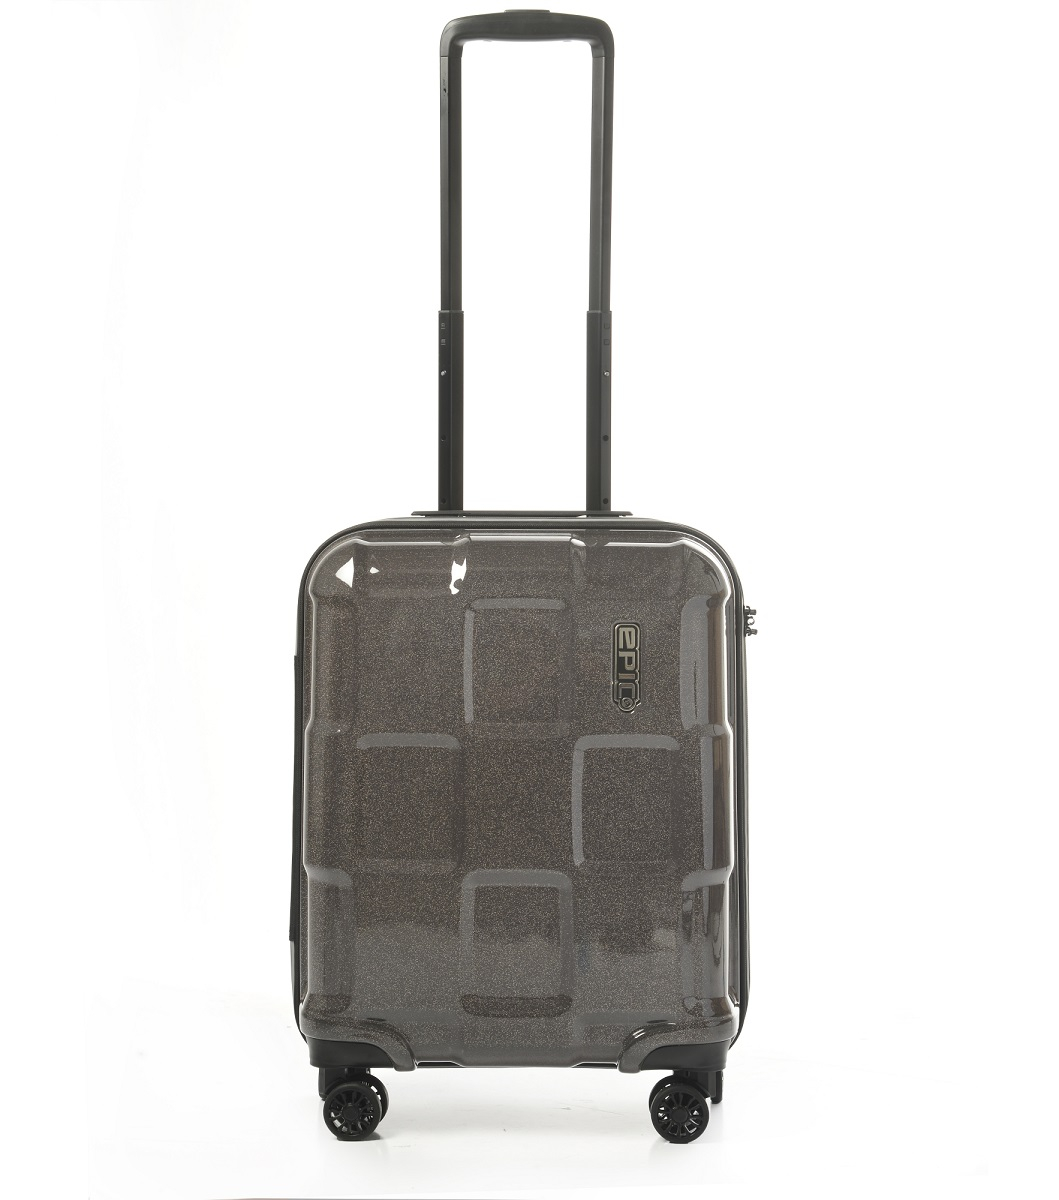 Image of Crate Reflex - 4 Rollen Trolley 55 cm in Charcoal Black